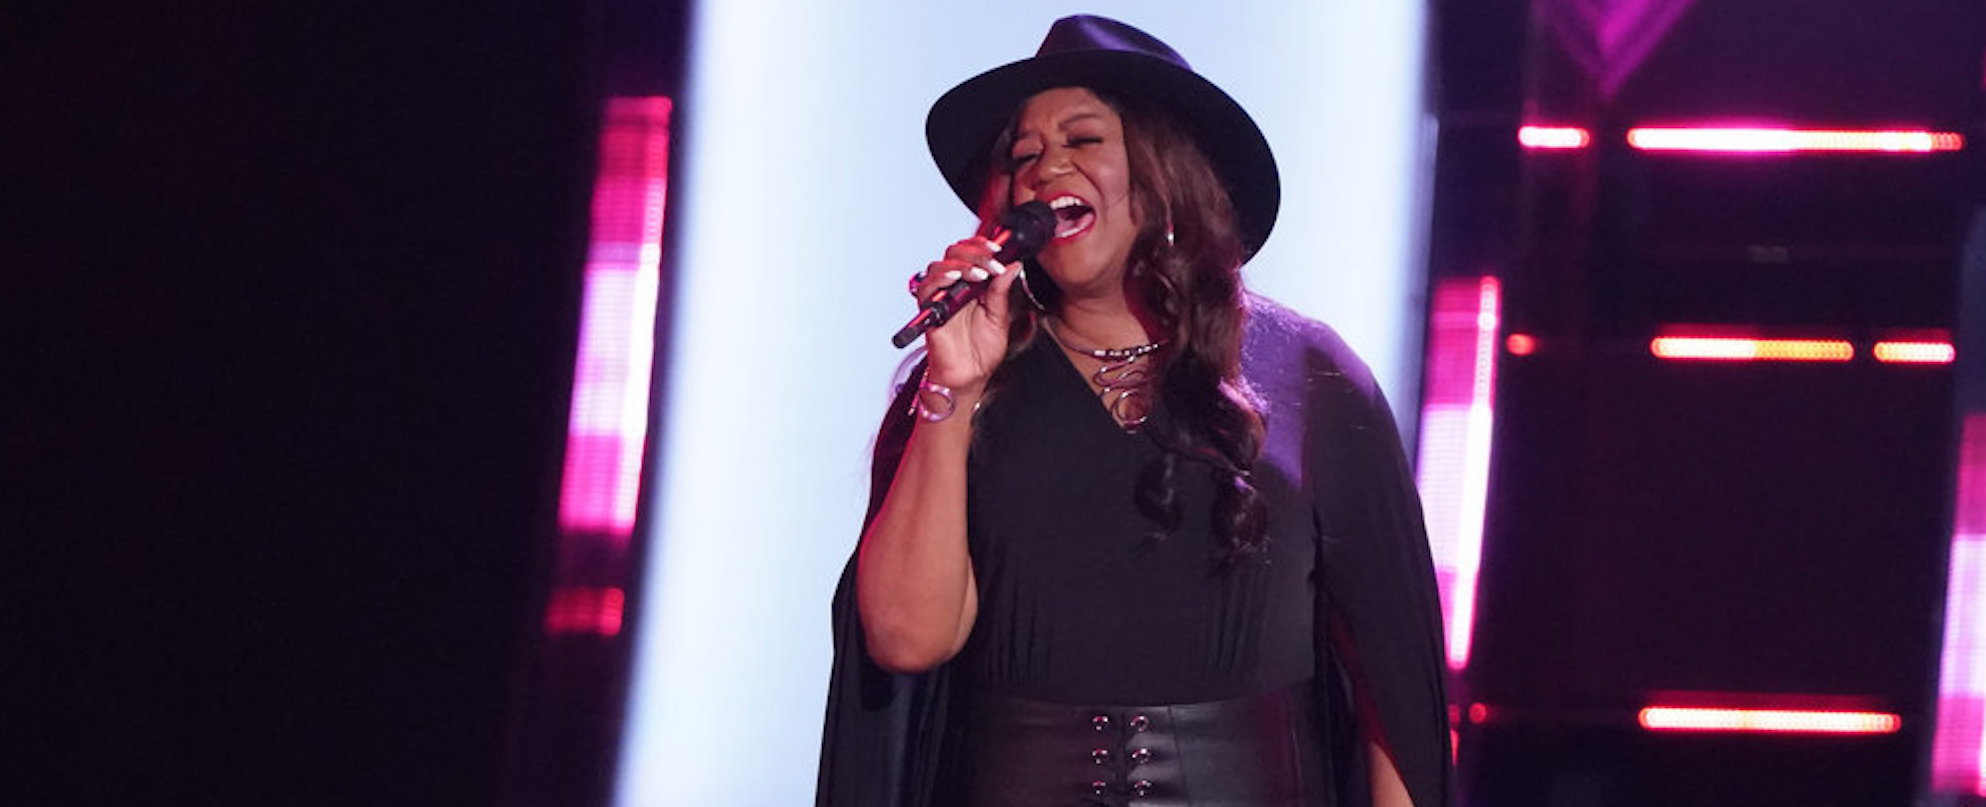 Blake Shelton Calls Wendy Moten’s ‘The Voice’ Performance “Top 3 Blind Audition of All Time”